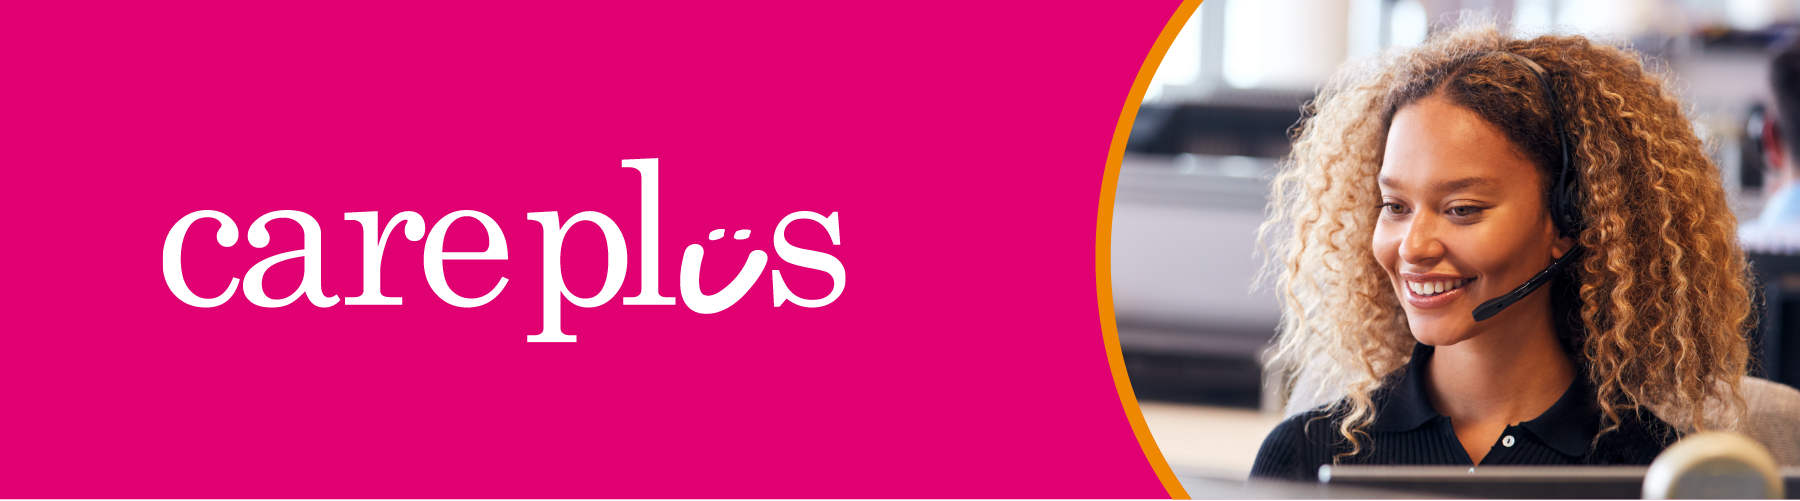 Care Plus logo in white on a pink background with a photo of a female